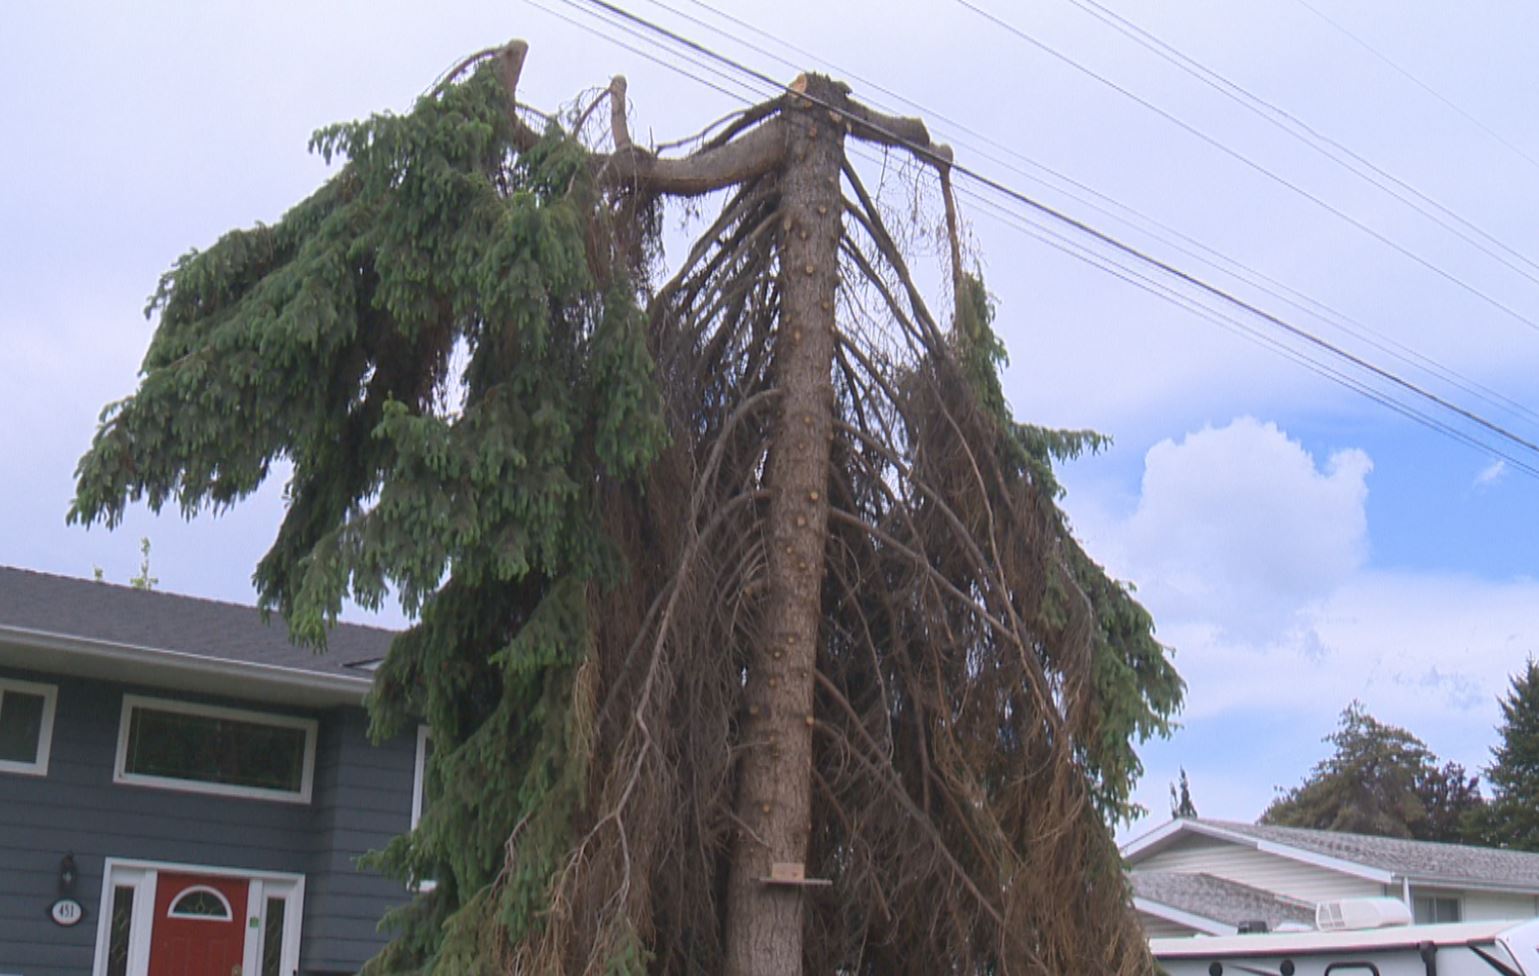 Trees trimmed near power lines in Okanagan raising safety concerns